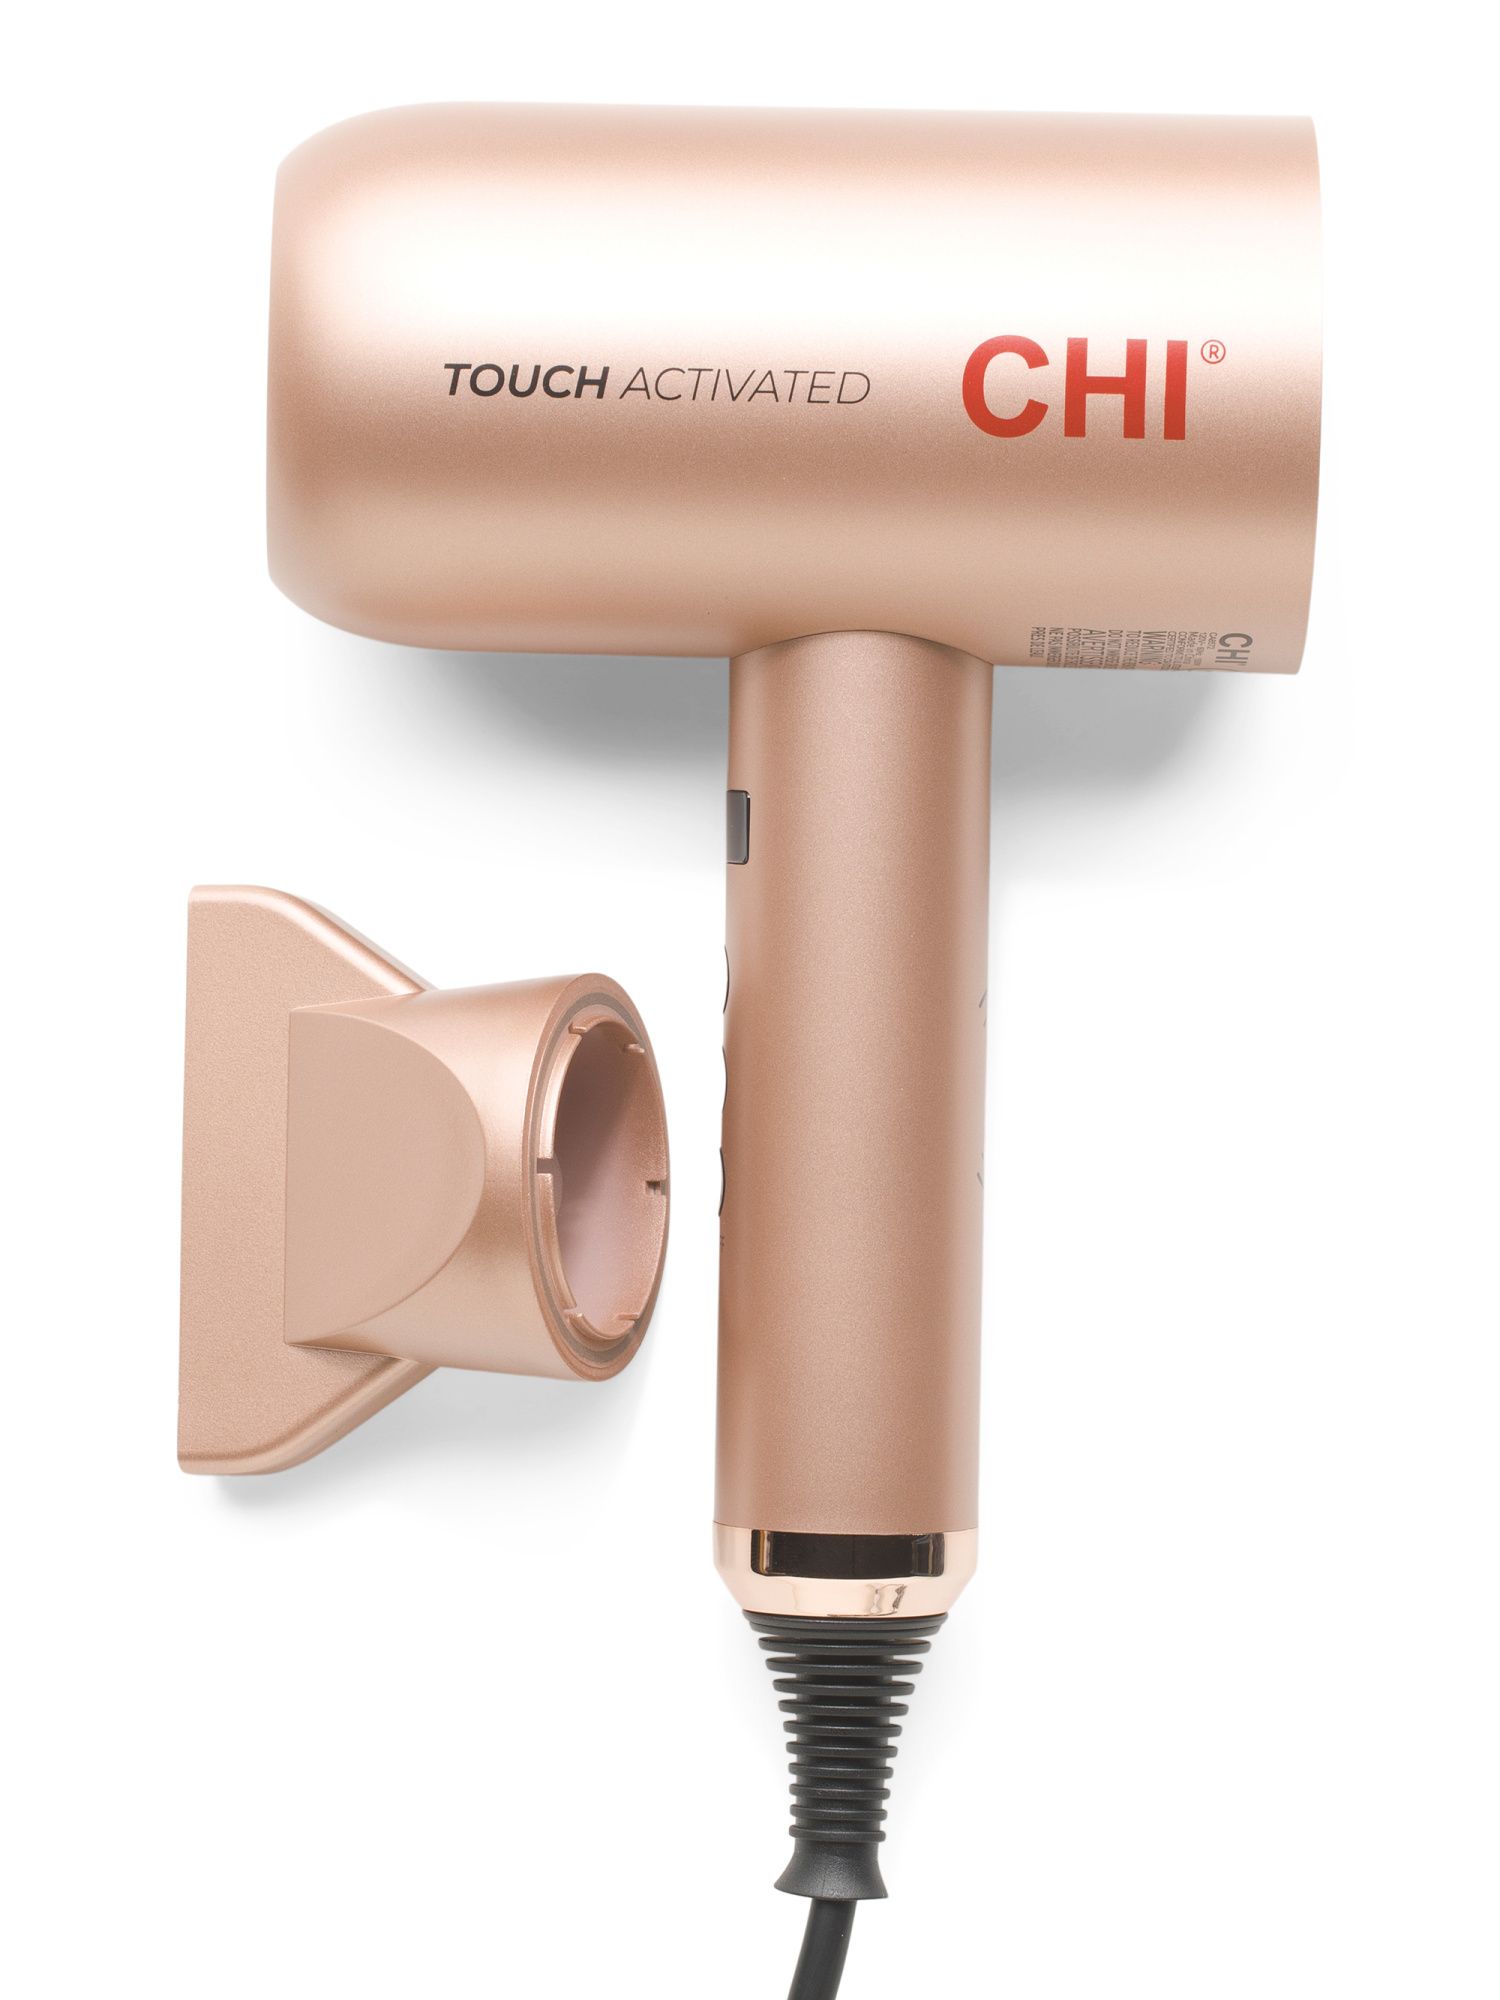 Touch Activated Hair Dryer | TJ Maxx